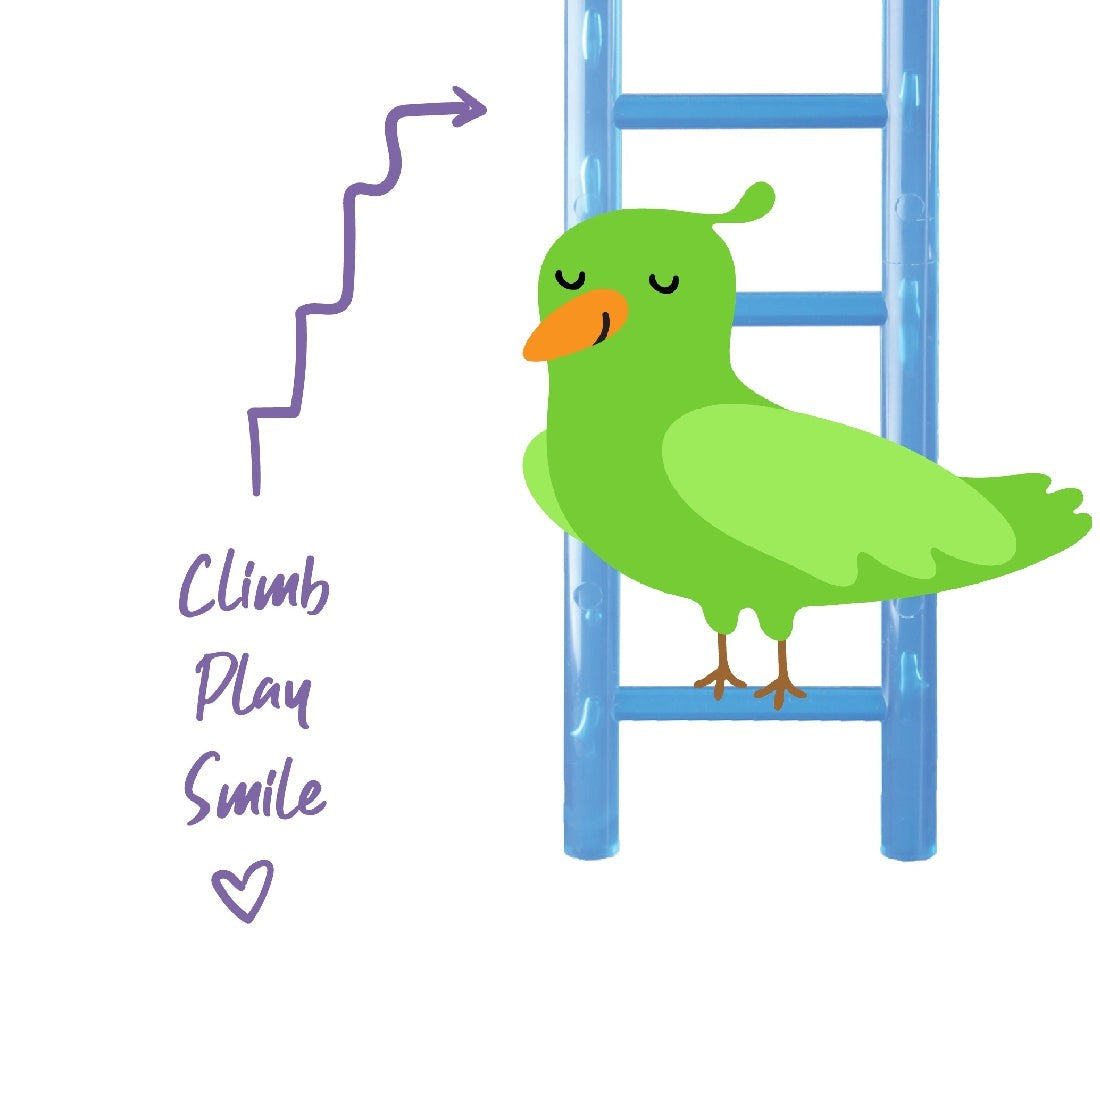 Green bird toy by a blue ladder, with "Climb Play Smile" written.